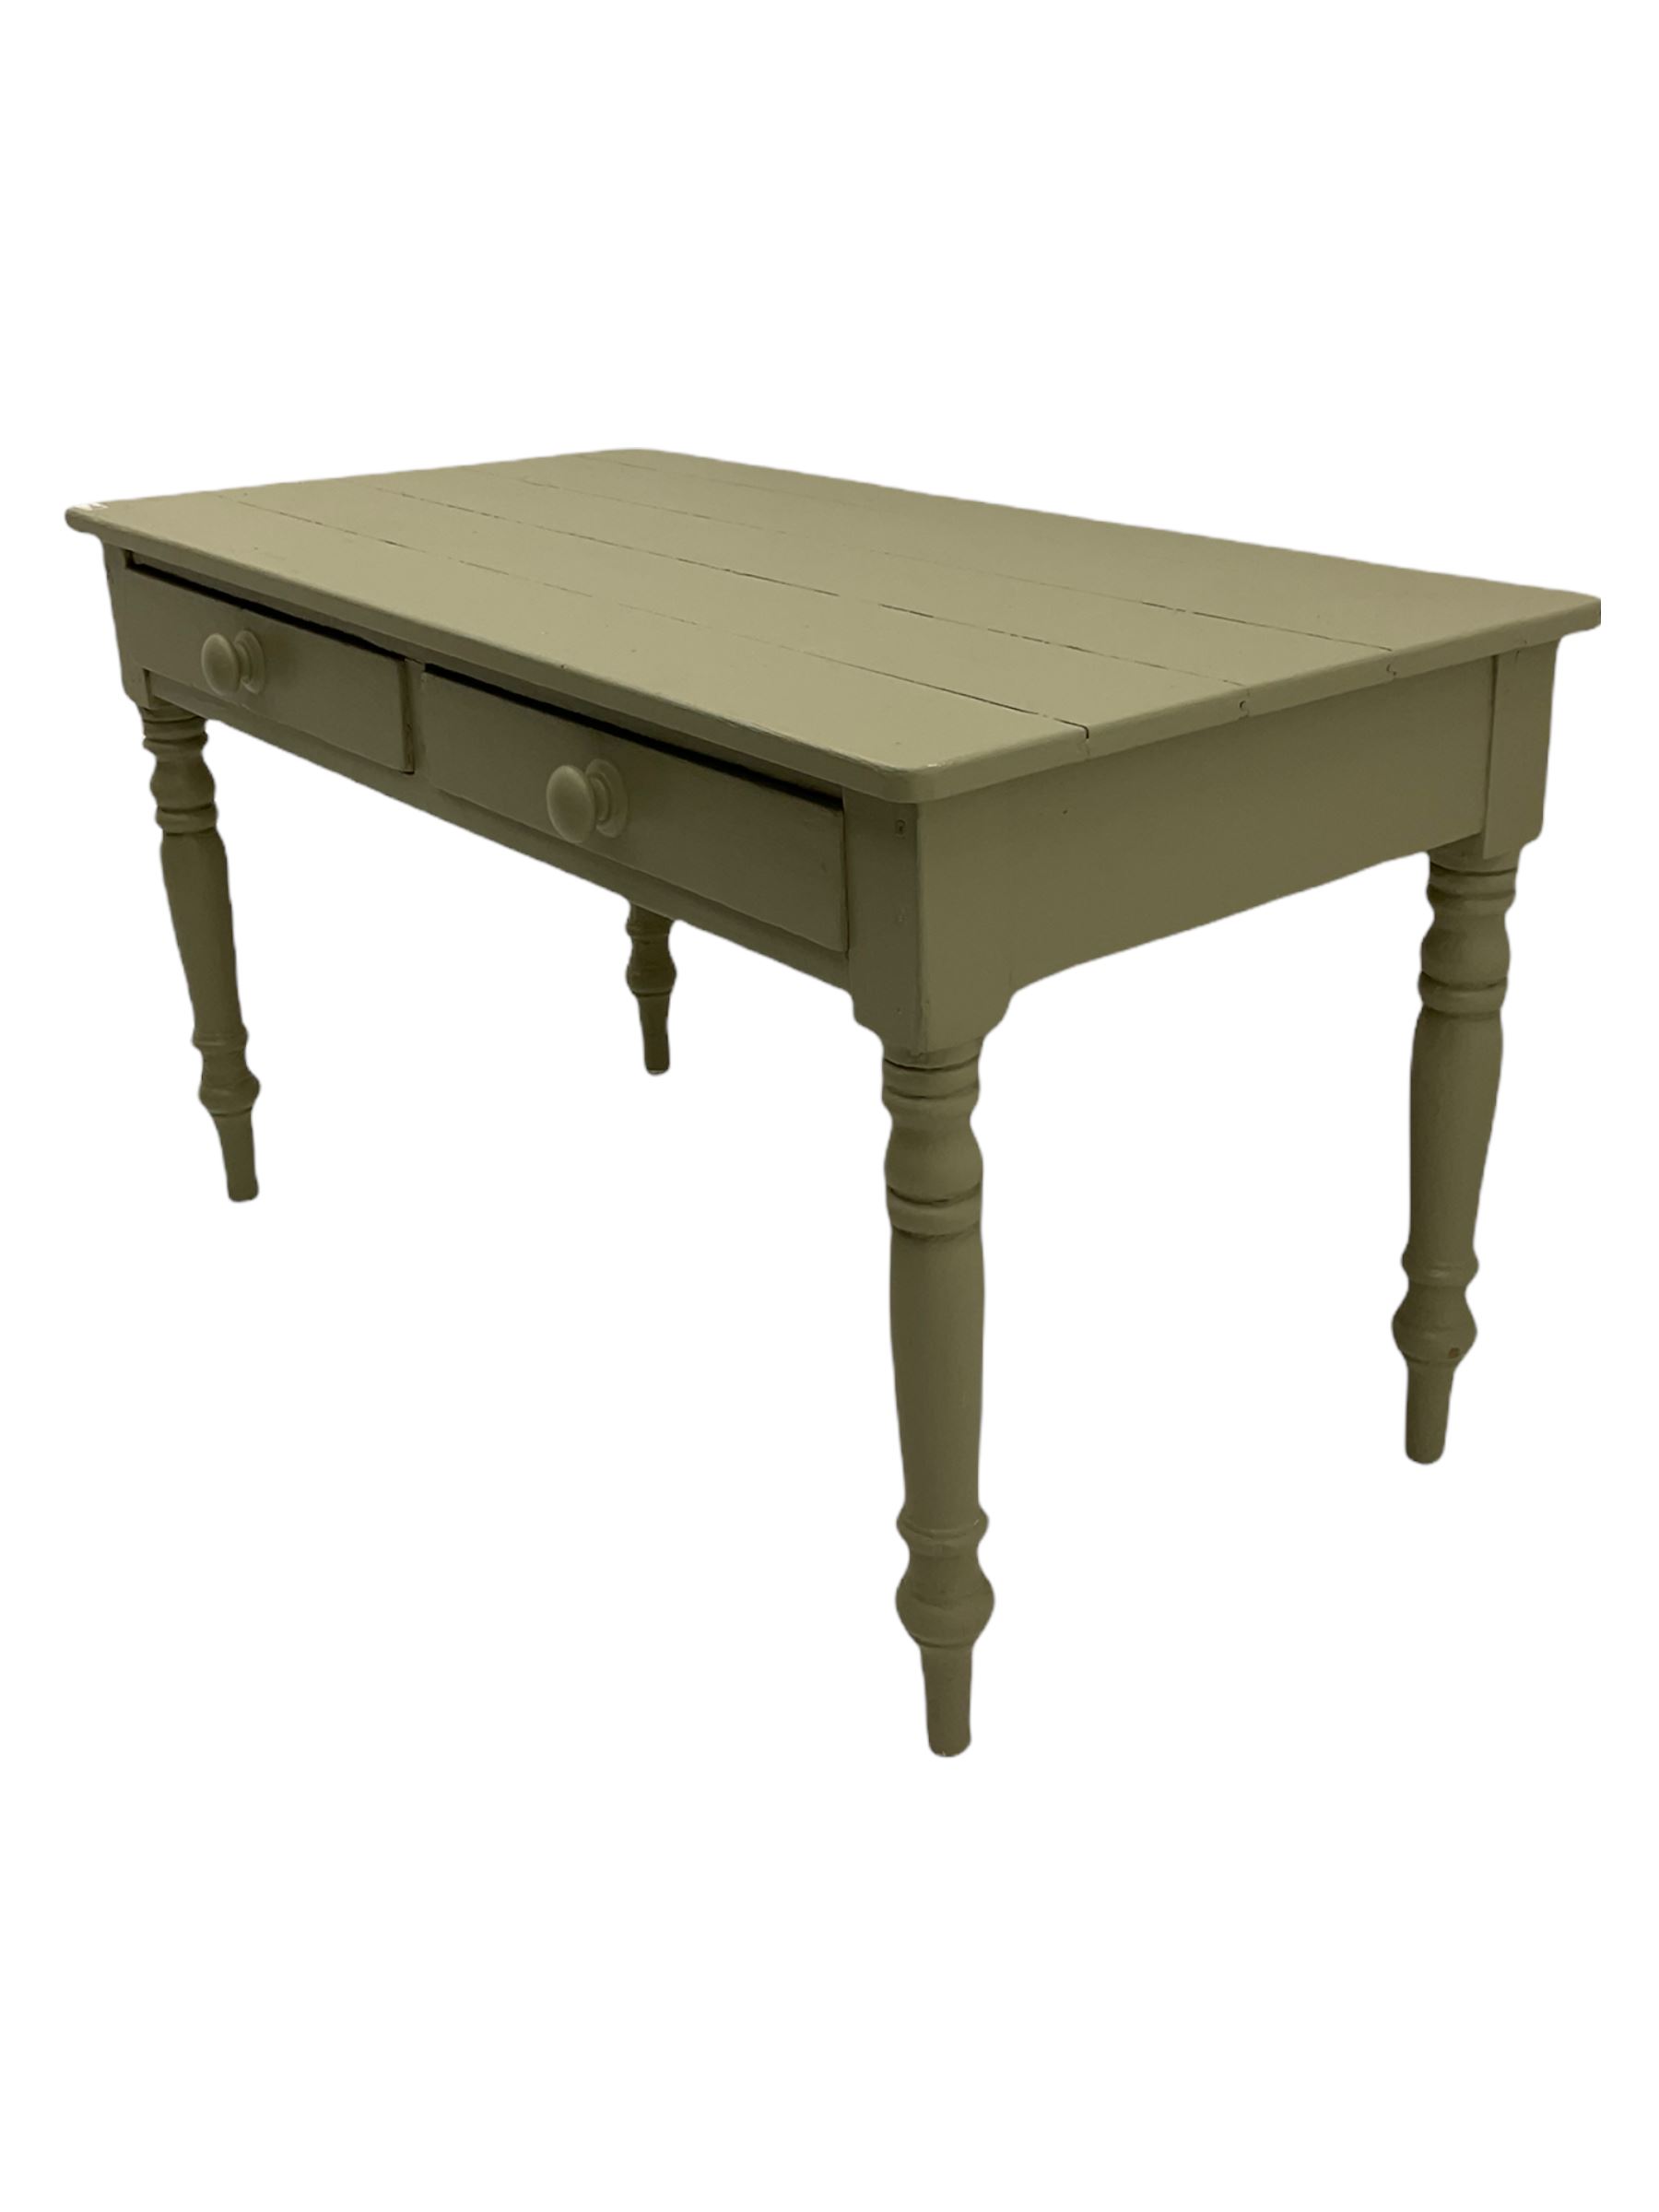 Victorian painted pine table - Image 3 of 4